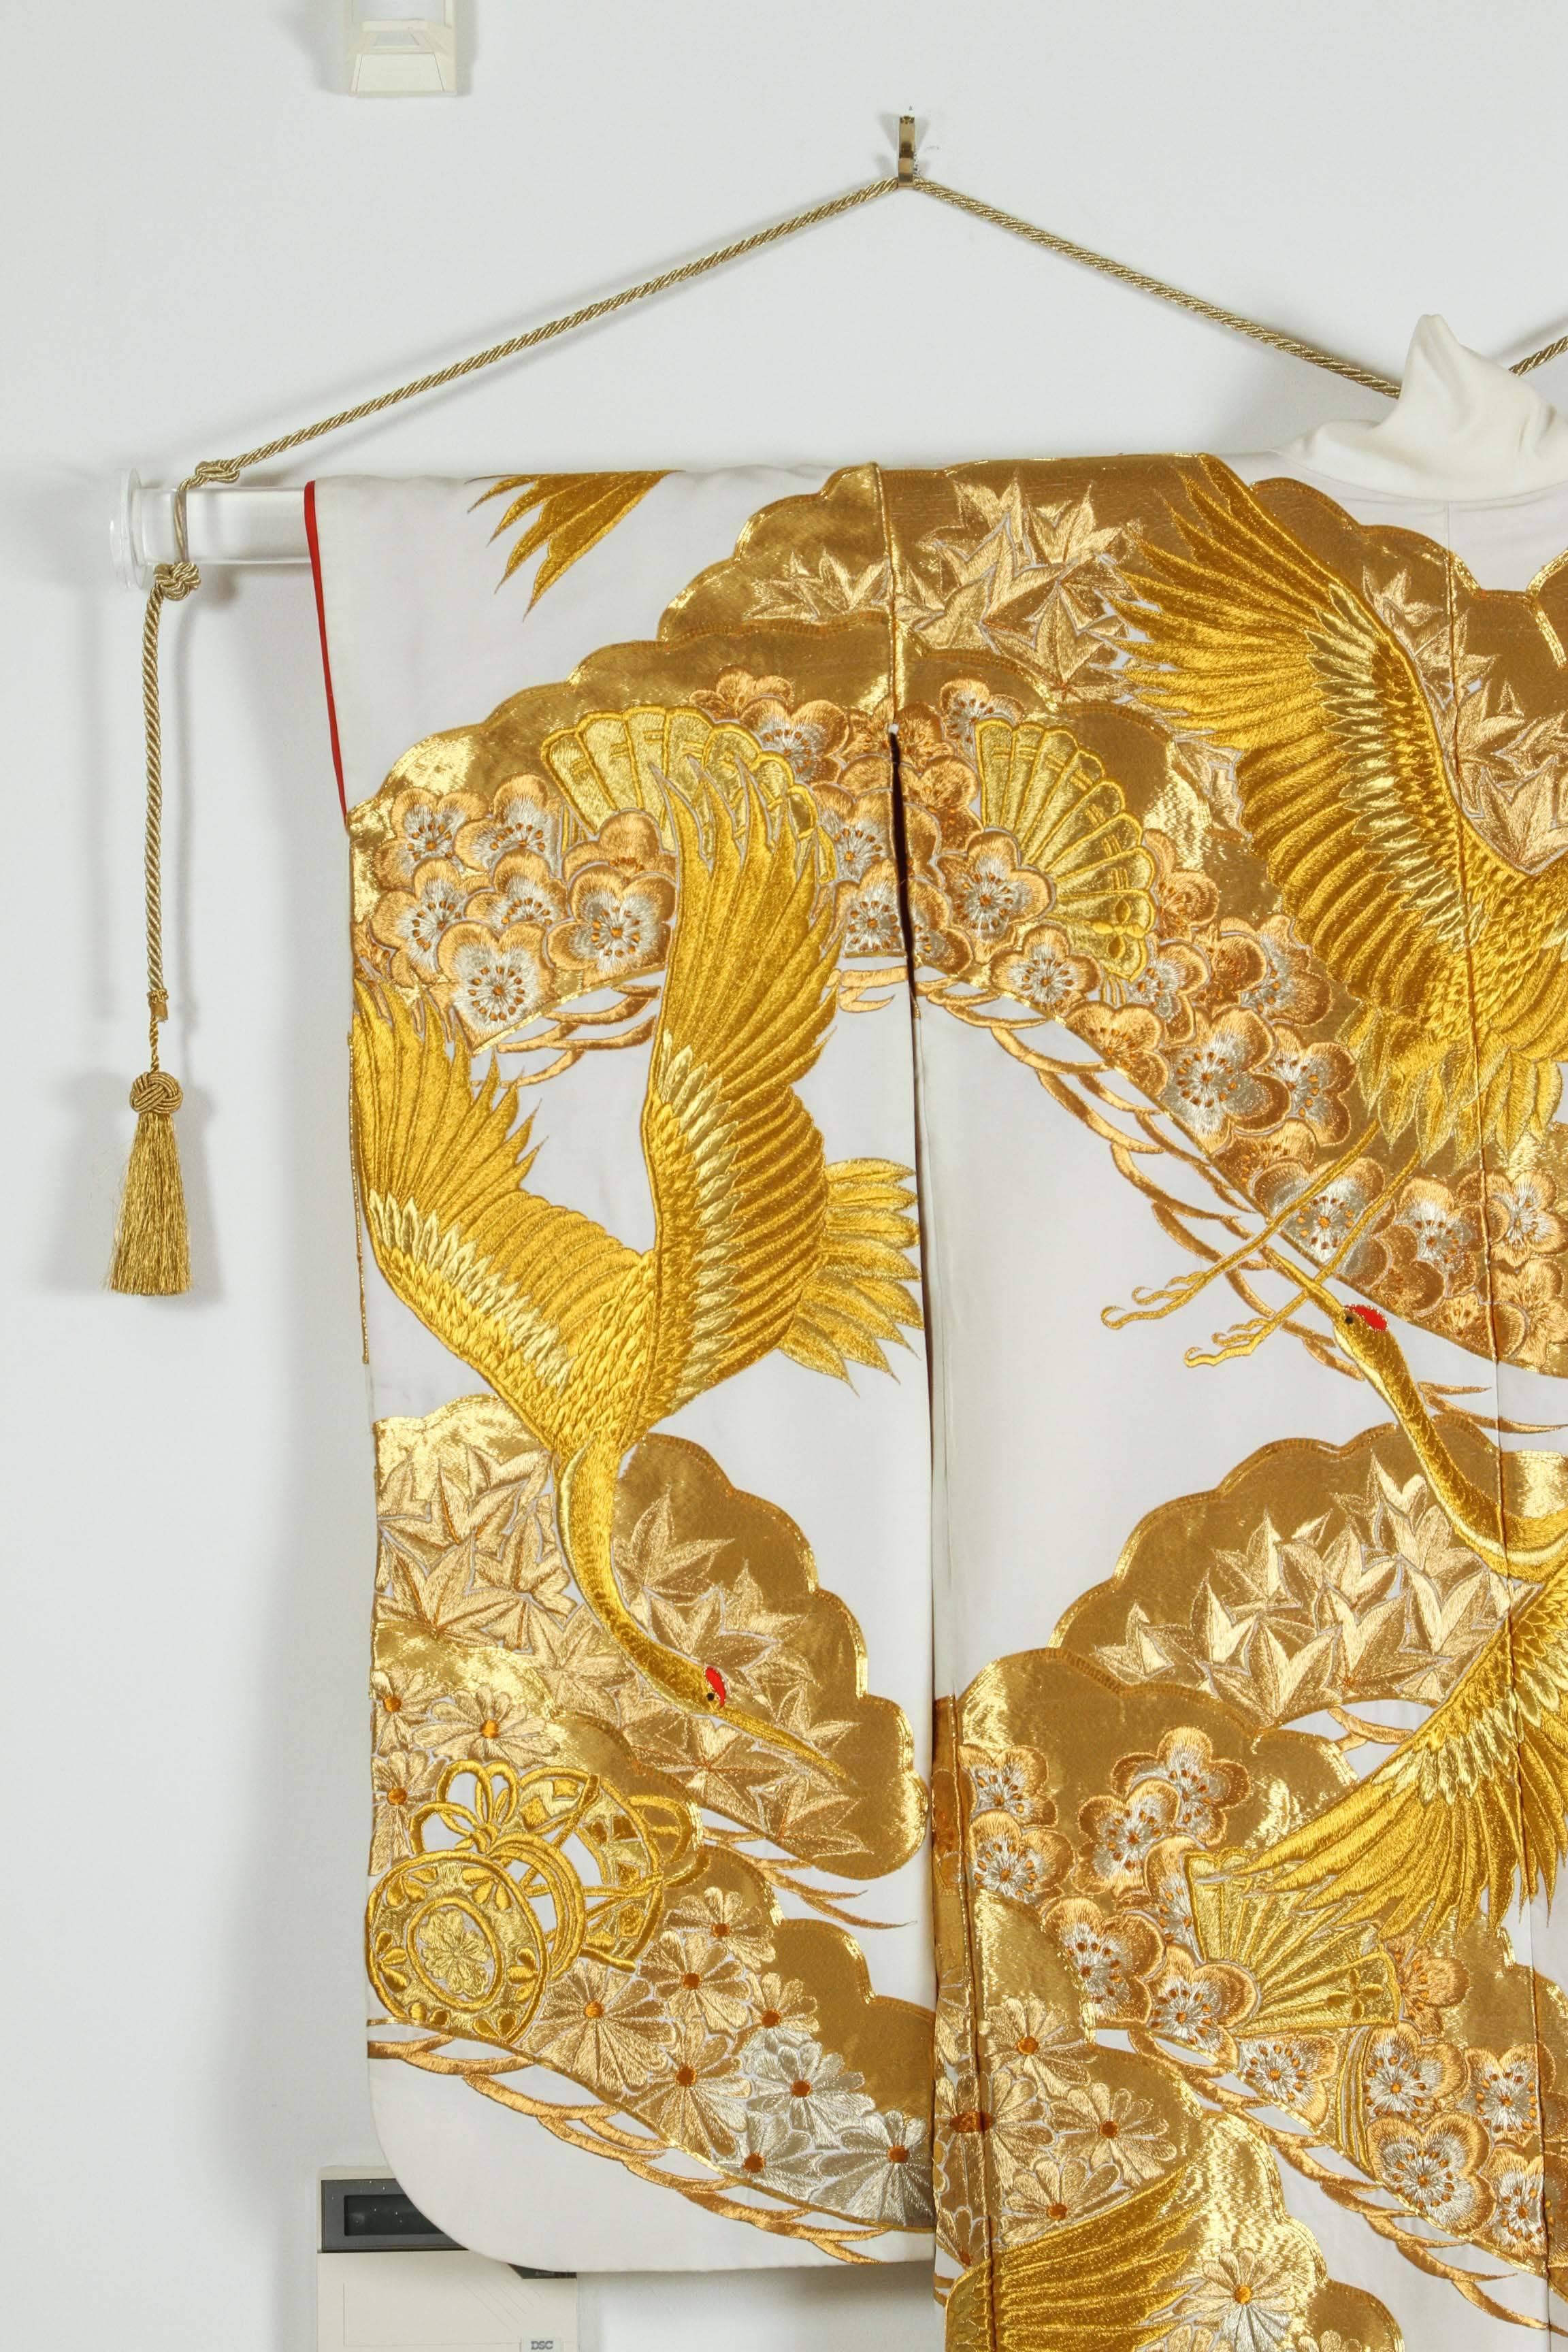 A vintage Mid-Century collectable Japanese ceremonial kimono.
On display Lucite barre and gold cords.
One of a kind hand crafted fabulous Museum quality ceremonial kimono in pure white silk with intricate detailed gold hand-embroidery of cranes